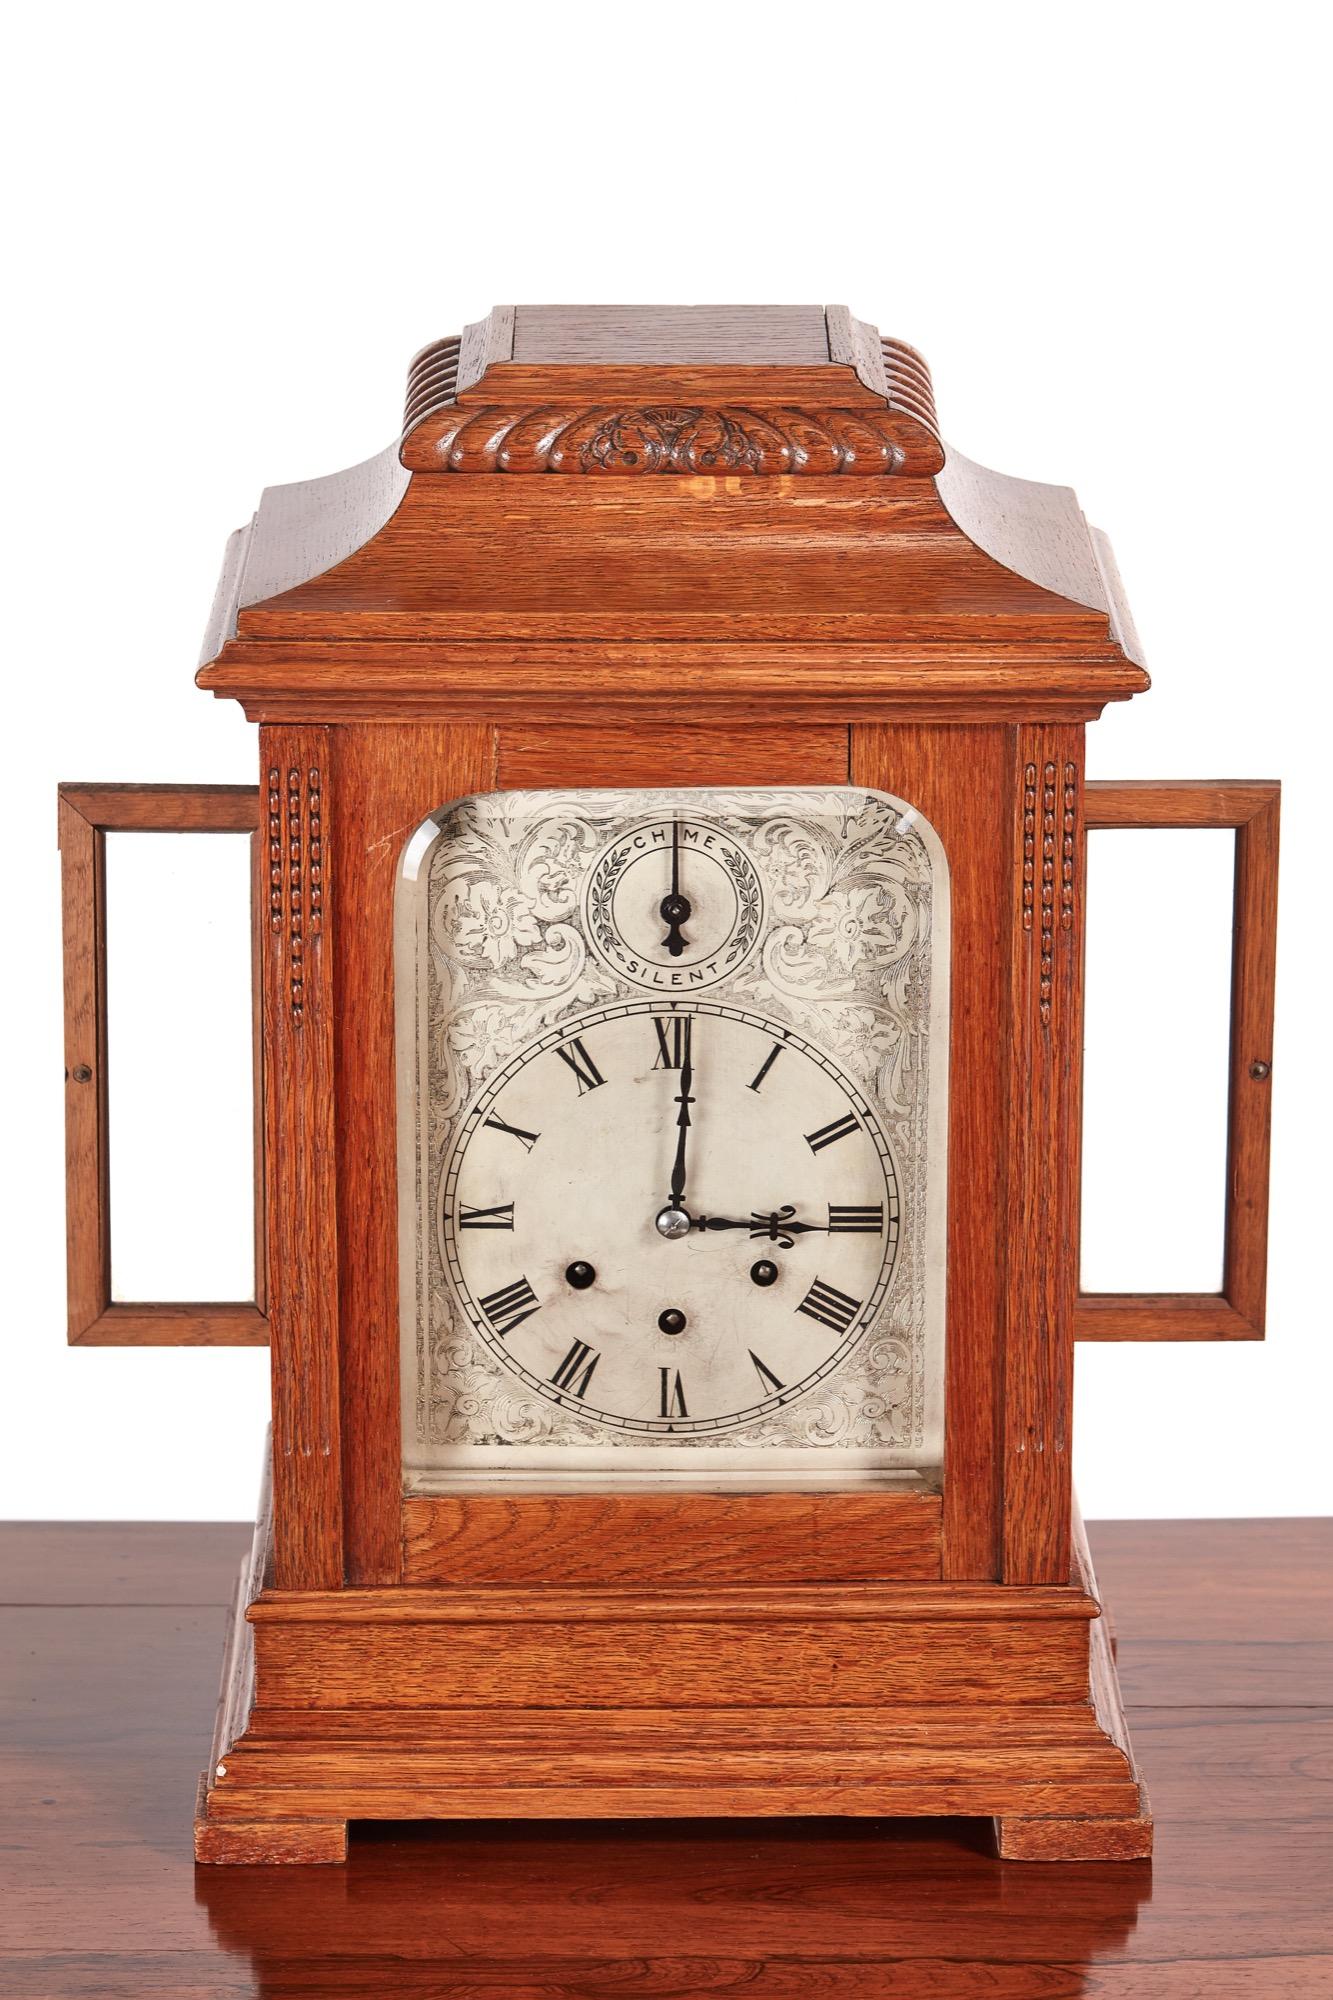 This is a large 19th century antique oak 8 day bracket clock with engraved roman silvered chapter ring with chime/silent dial and 8 day three train movement. It has a beautifully carved oak case. It stands on a shaped base. It is in good working